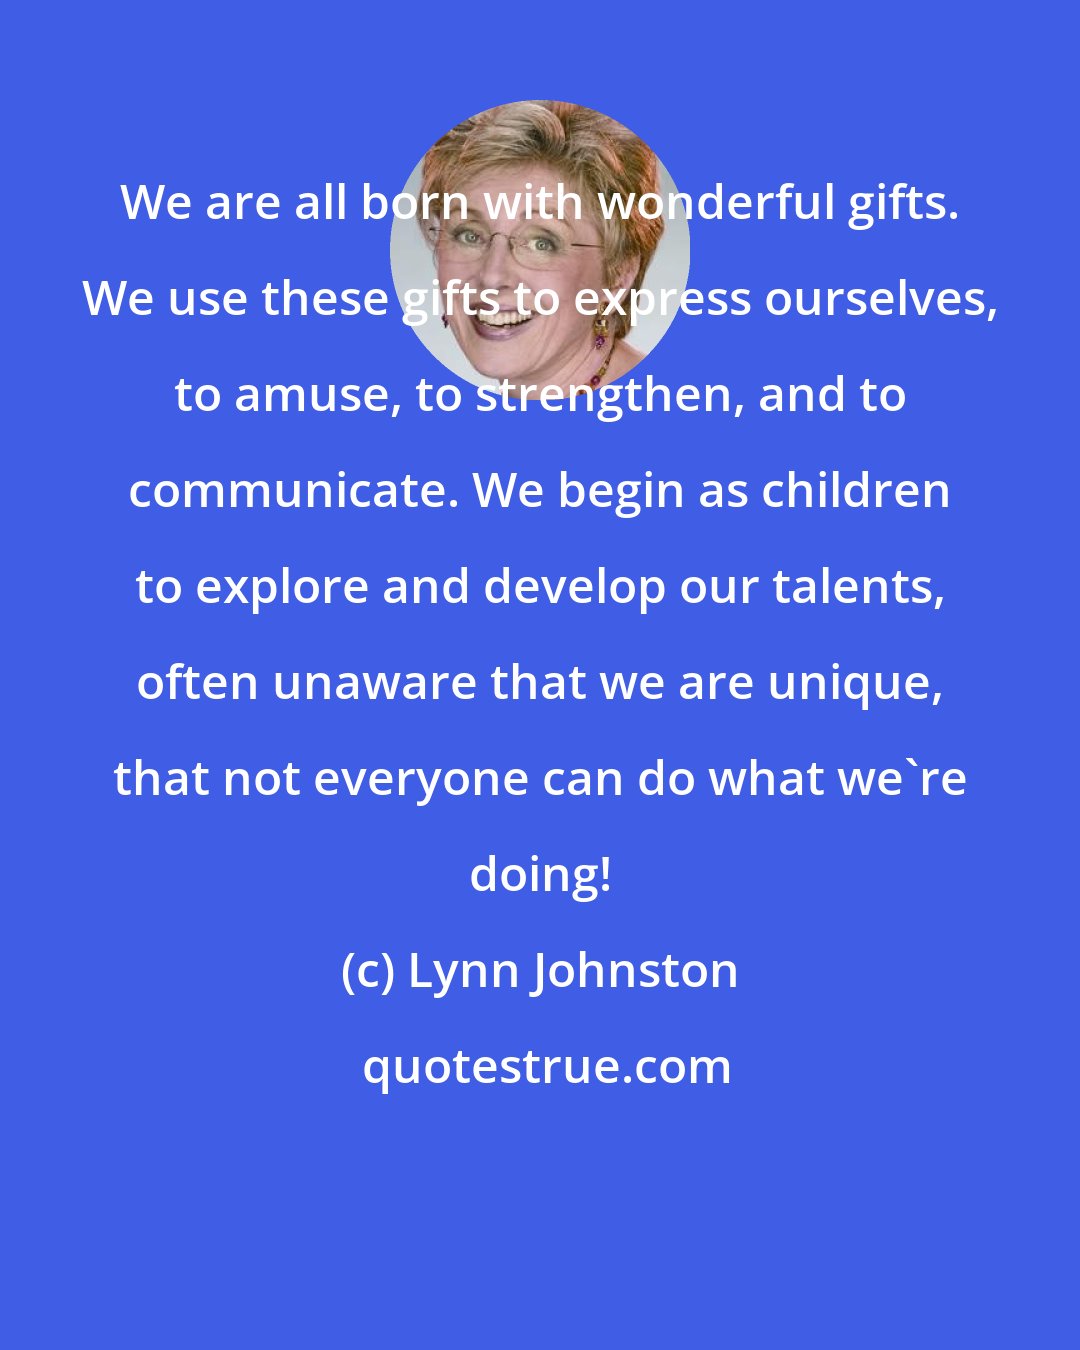 Lynn Johnston: We are all born with wonderful gifts. We use these gifts to express ourselves, to amuse, to strengthen, and to communicate. We begin as children to explore and develop our talents, often unaware that we are unique, that not everyone can do what we're doing!